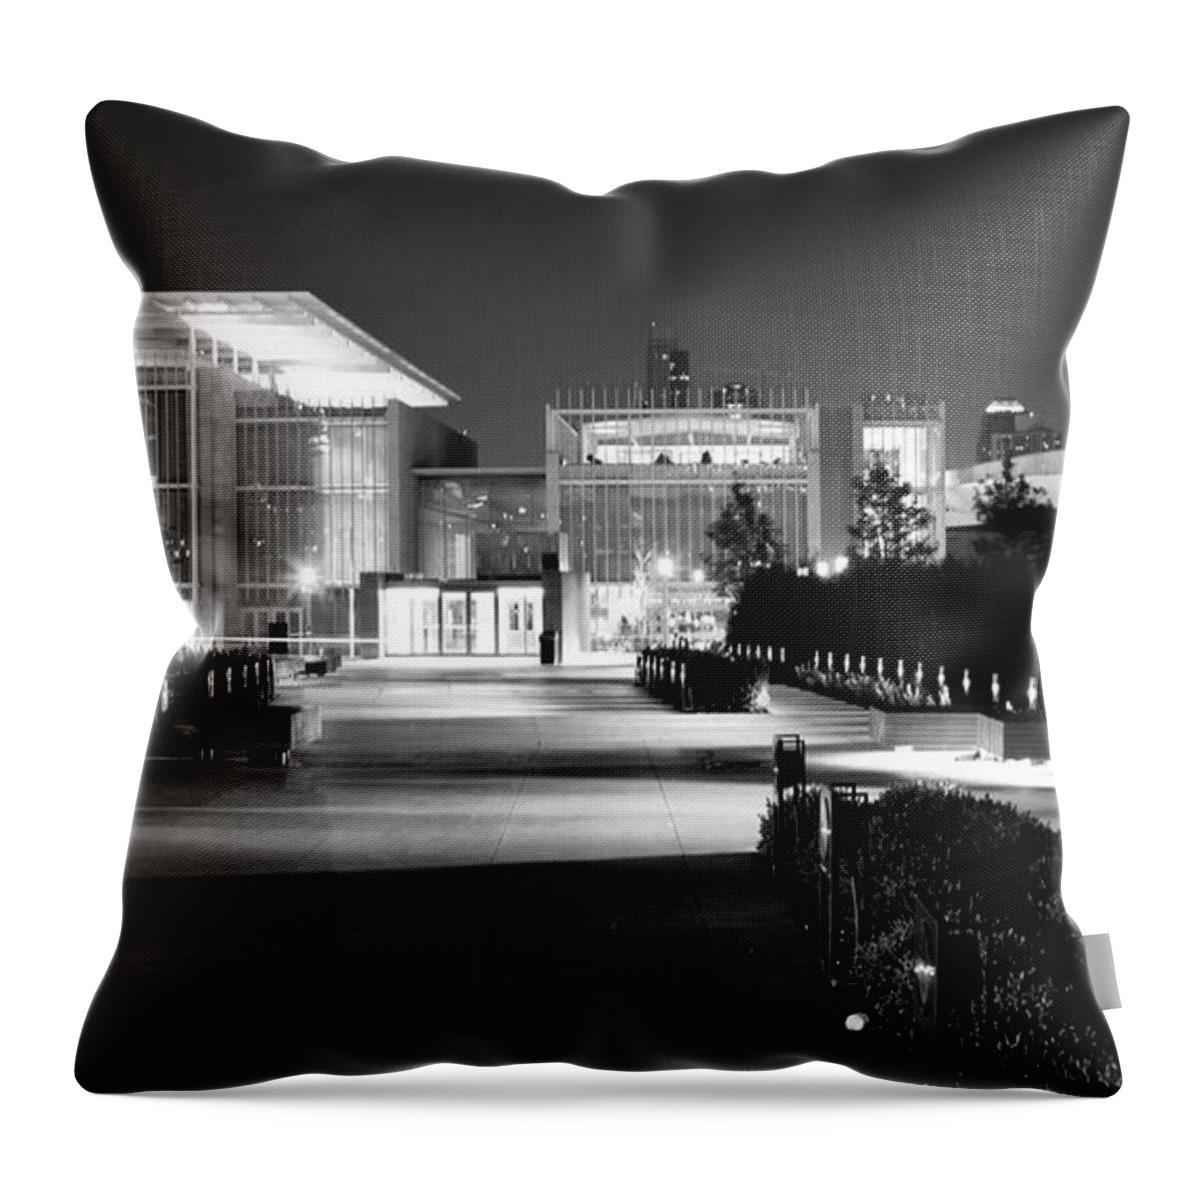 Architecture Throw Pillow featuring the photograph Art Institute Chicago Architecture Night by Patrick Malon